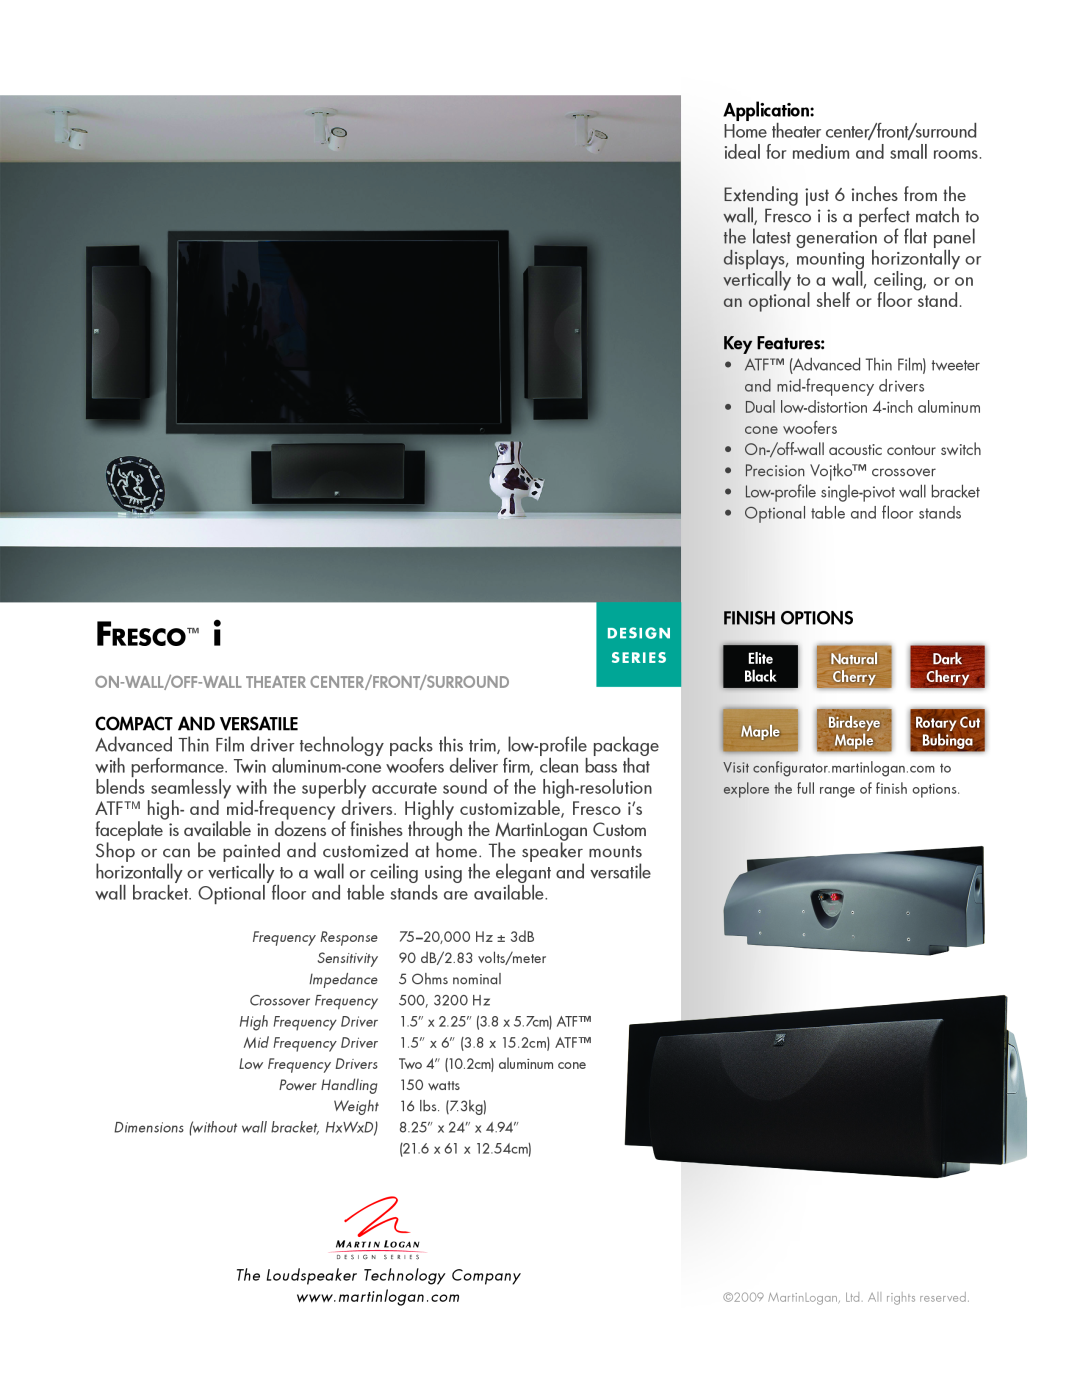 MartinLogan On-Wall/Off-Wall Theatre dimensions Fresco, compact and versatile, Application, Key Features, Finish options 